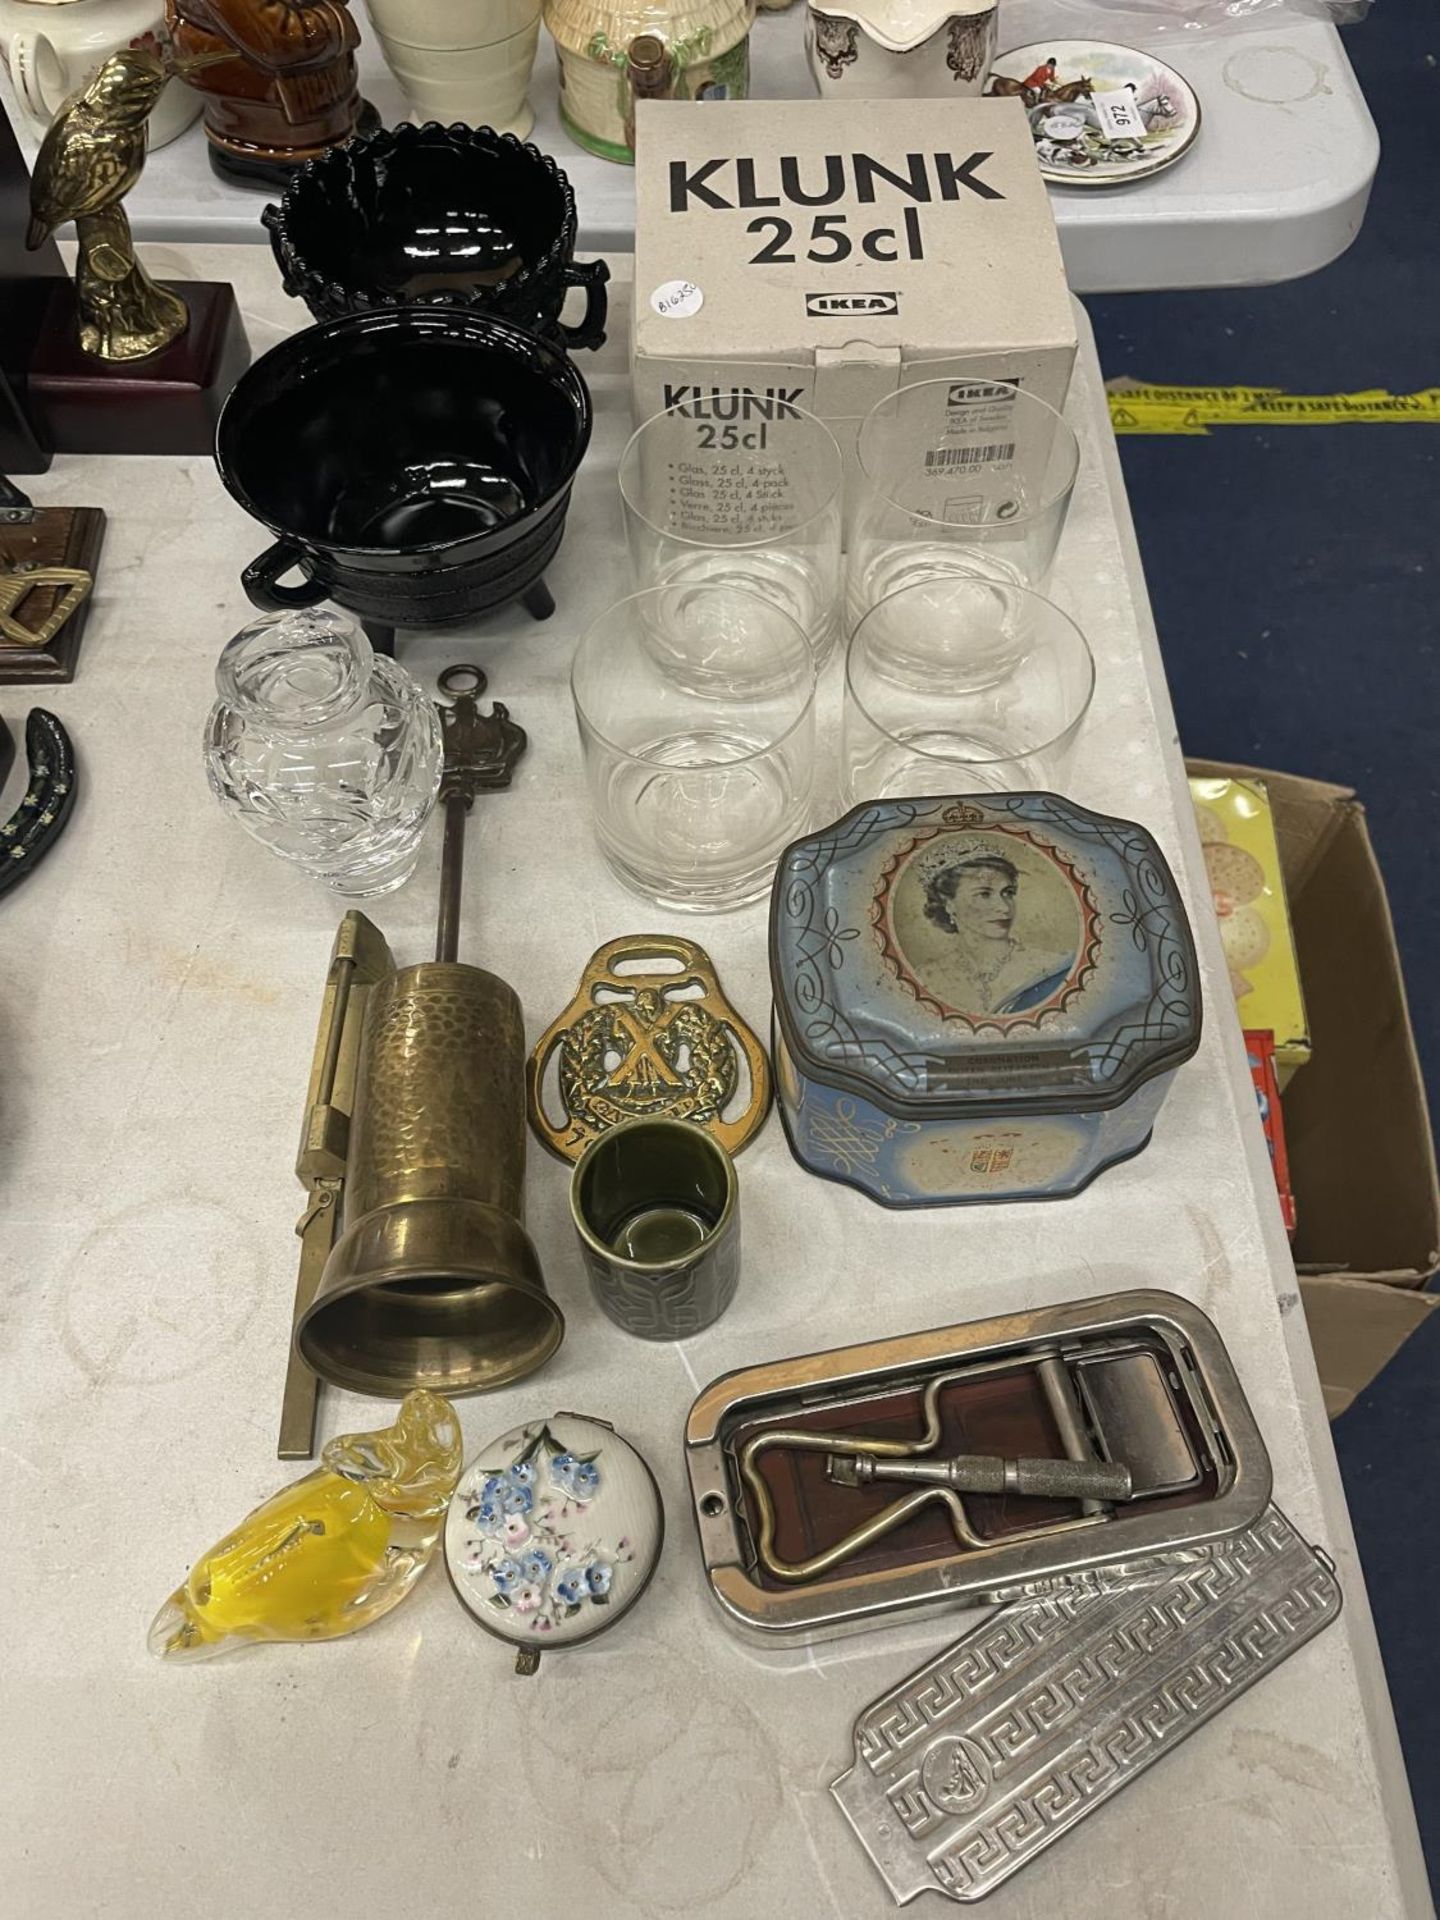 A MIXED LOT TO INCLUDE A VINTAGE RAZOR, TUMBLER GLASSES, BLACK GLASS BOWLS, BRASS ITEMS, ETC